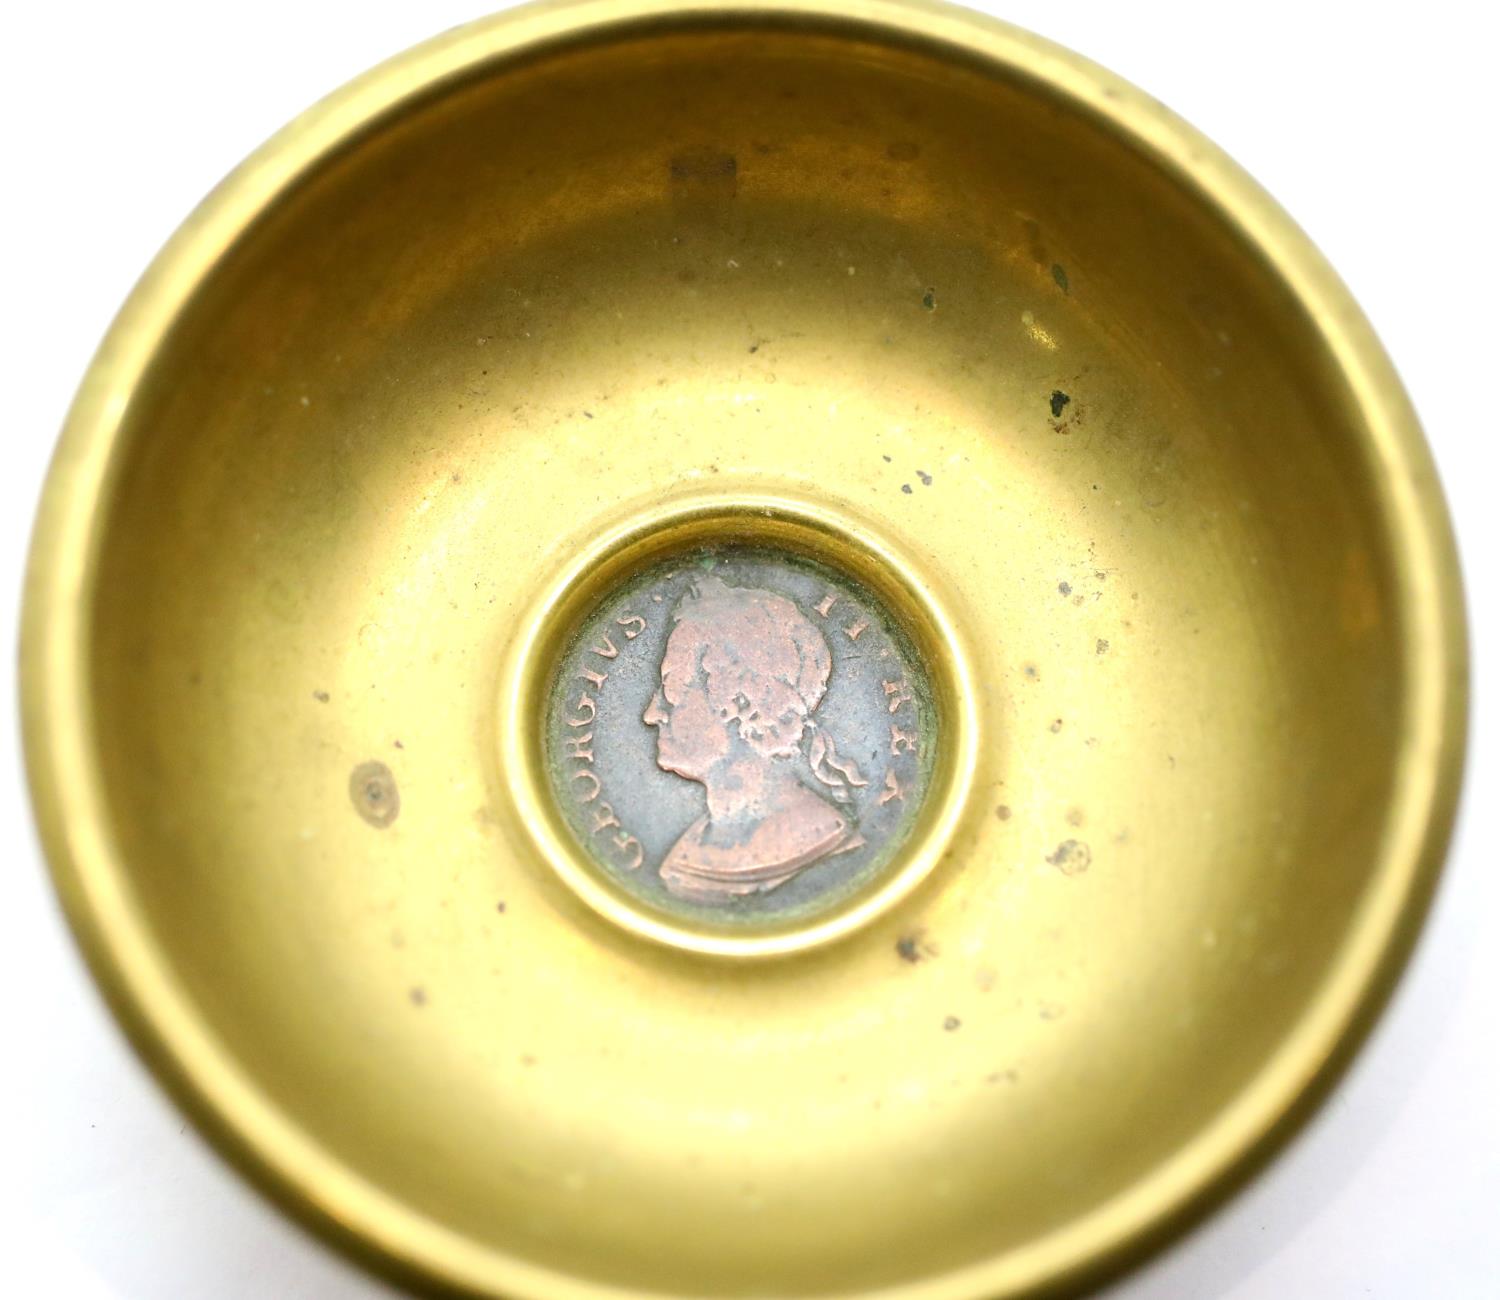 George II 1748 halfpenny set in a brass bowl. P&P Group 1 (£14+VAT for the first lot and £1+VAT